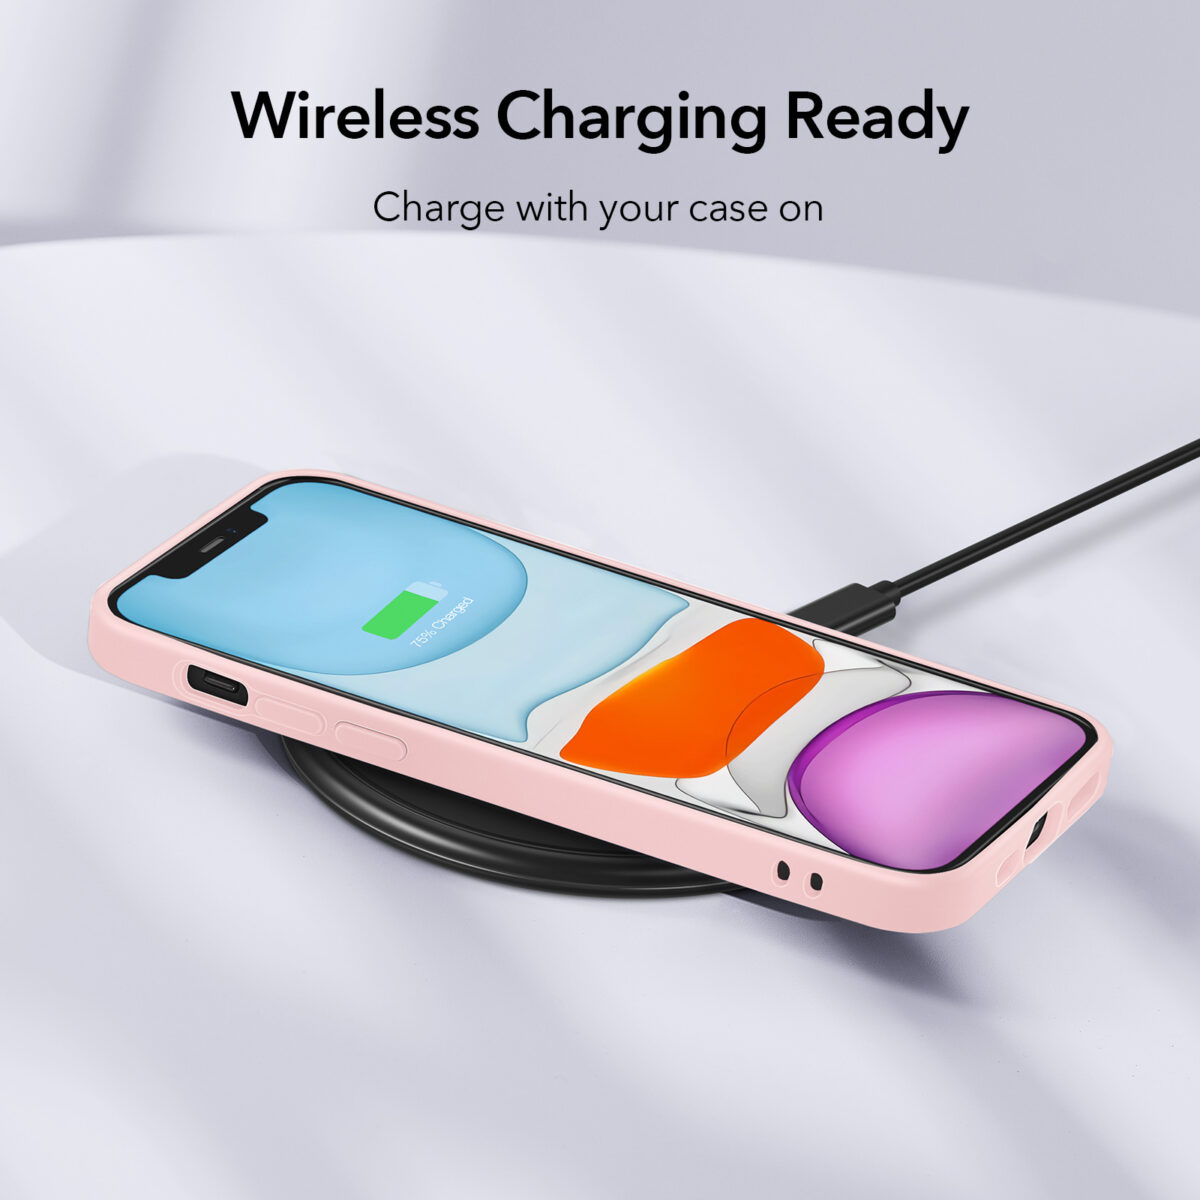 ESR Soft Silicone wireless charging ready Case Sand Pink for iPhone 12 Pro